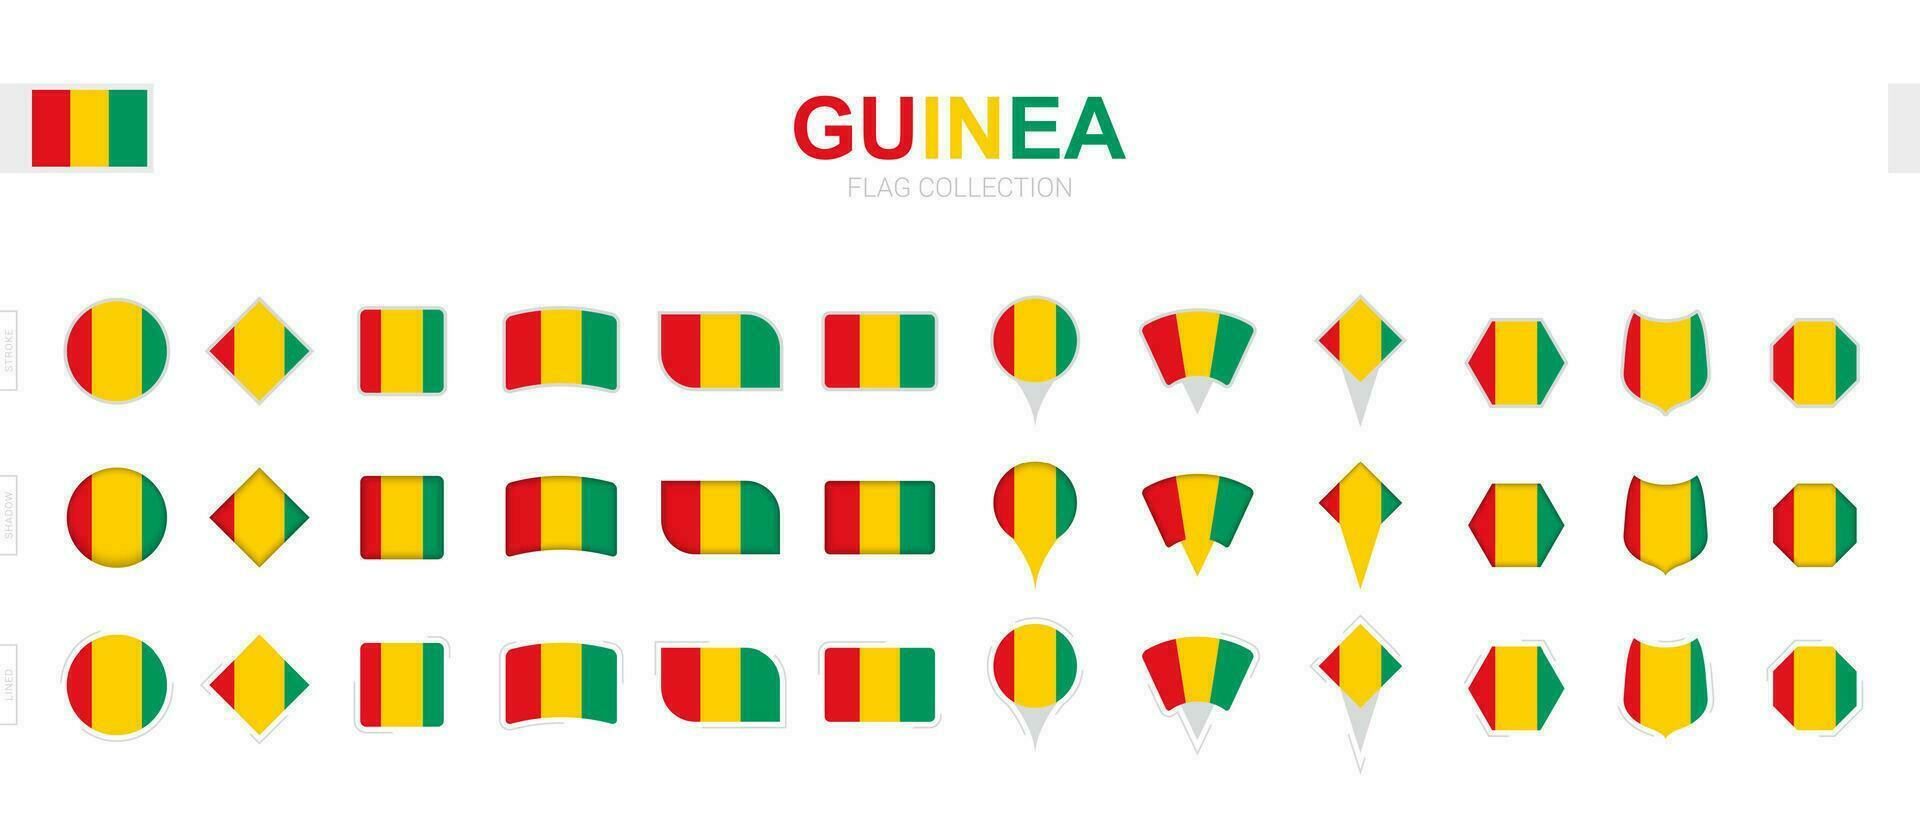 Large collection of Guinea flags of various shapes and effects. vector